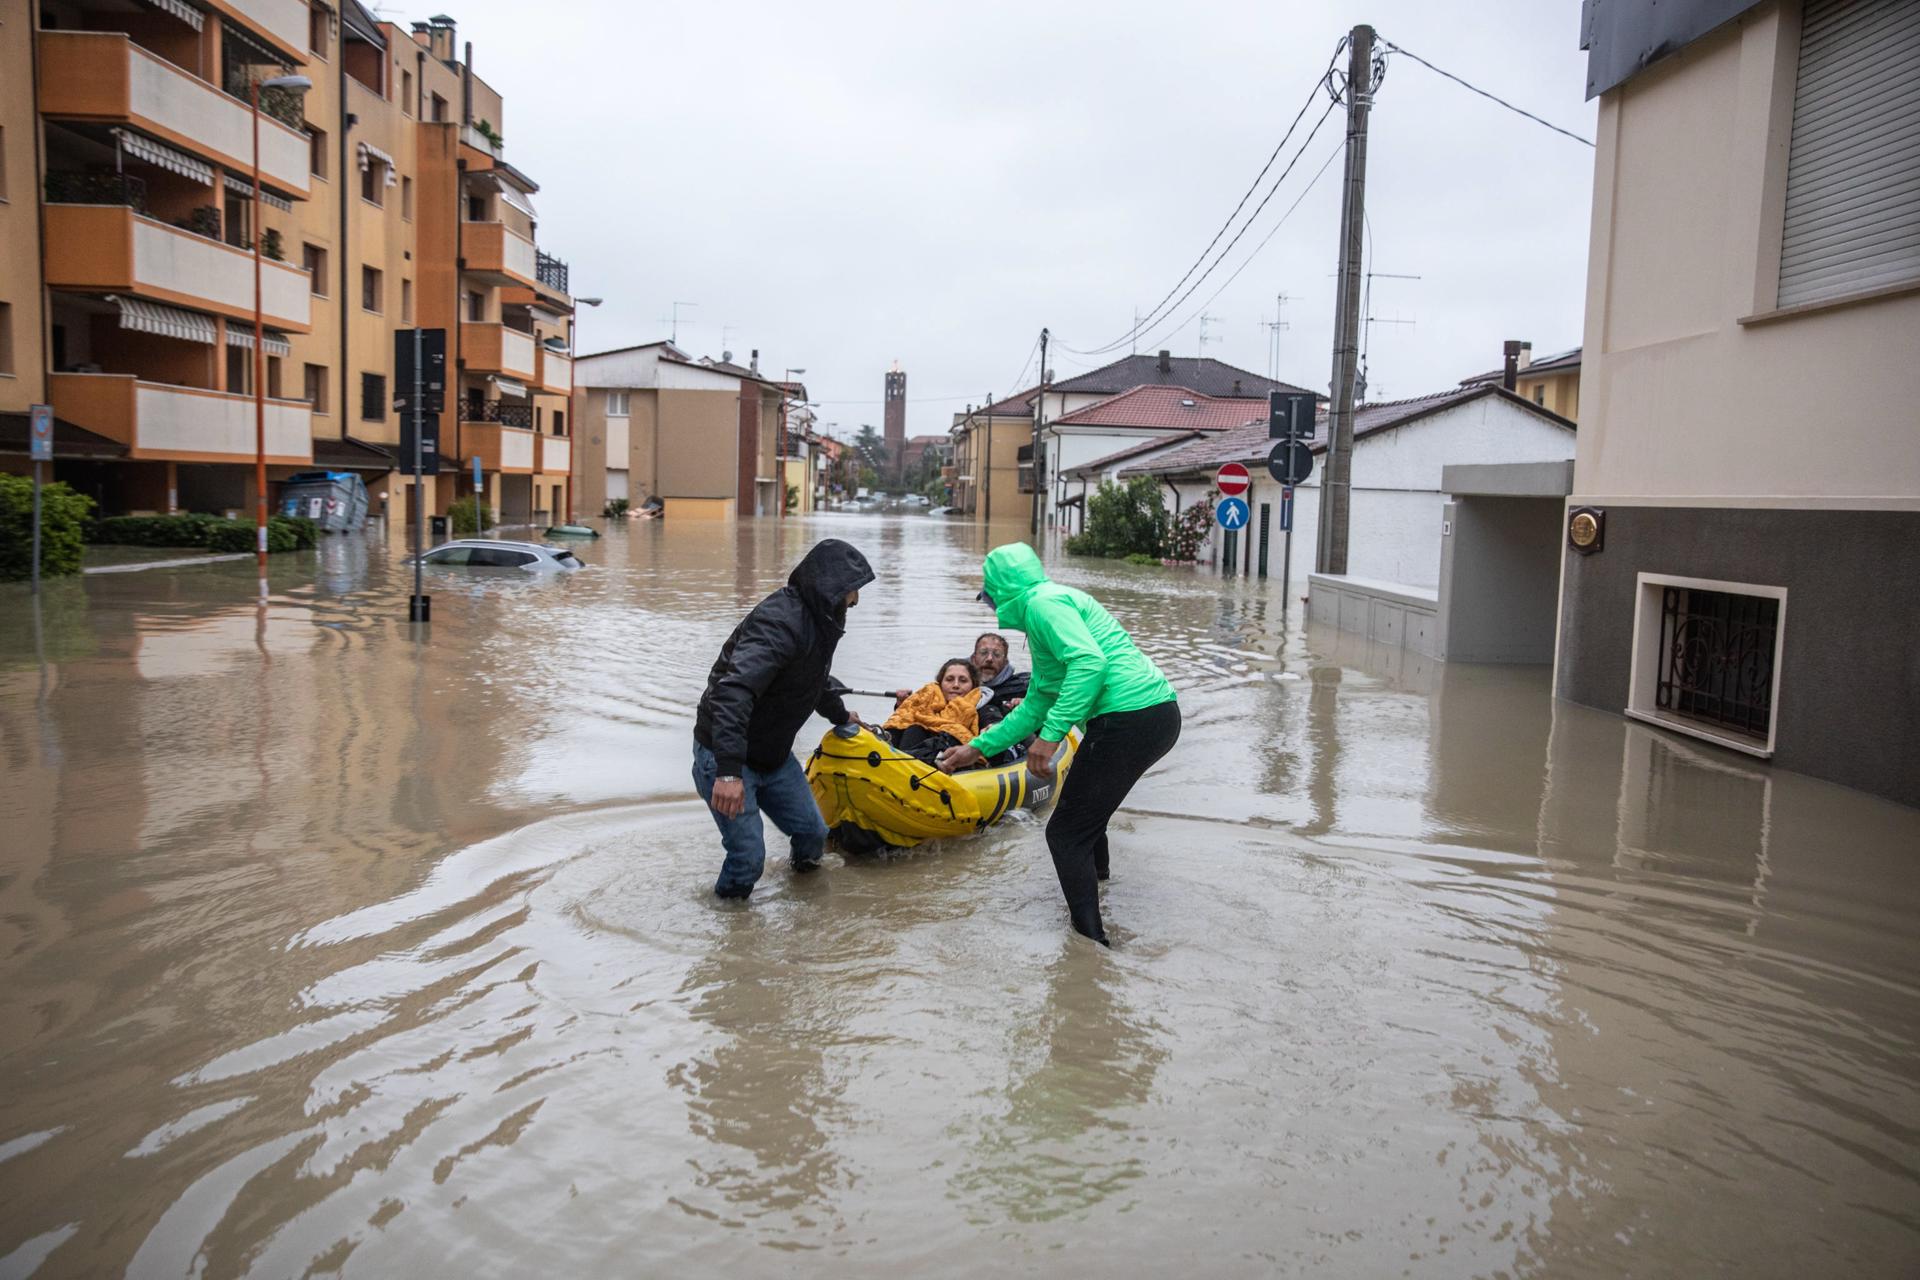 A citizen with an inflatable kayak goes back and forth between the flooded houses to bring some people stuck in the house to dry land, in Cesena, Italy, 17 May 2023. EFE/EPA/MAX CAVALLARI